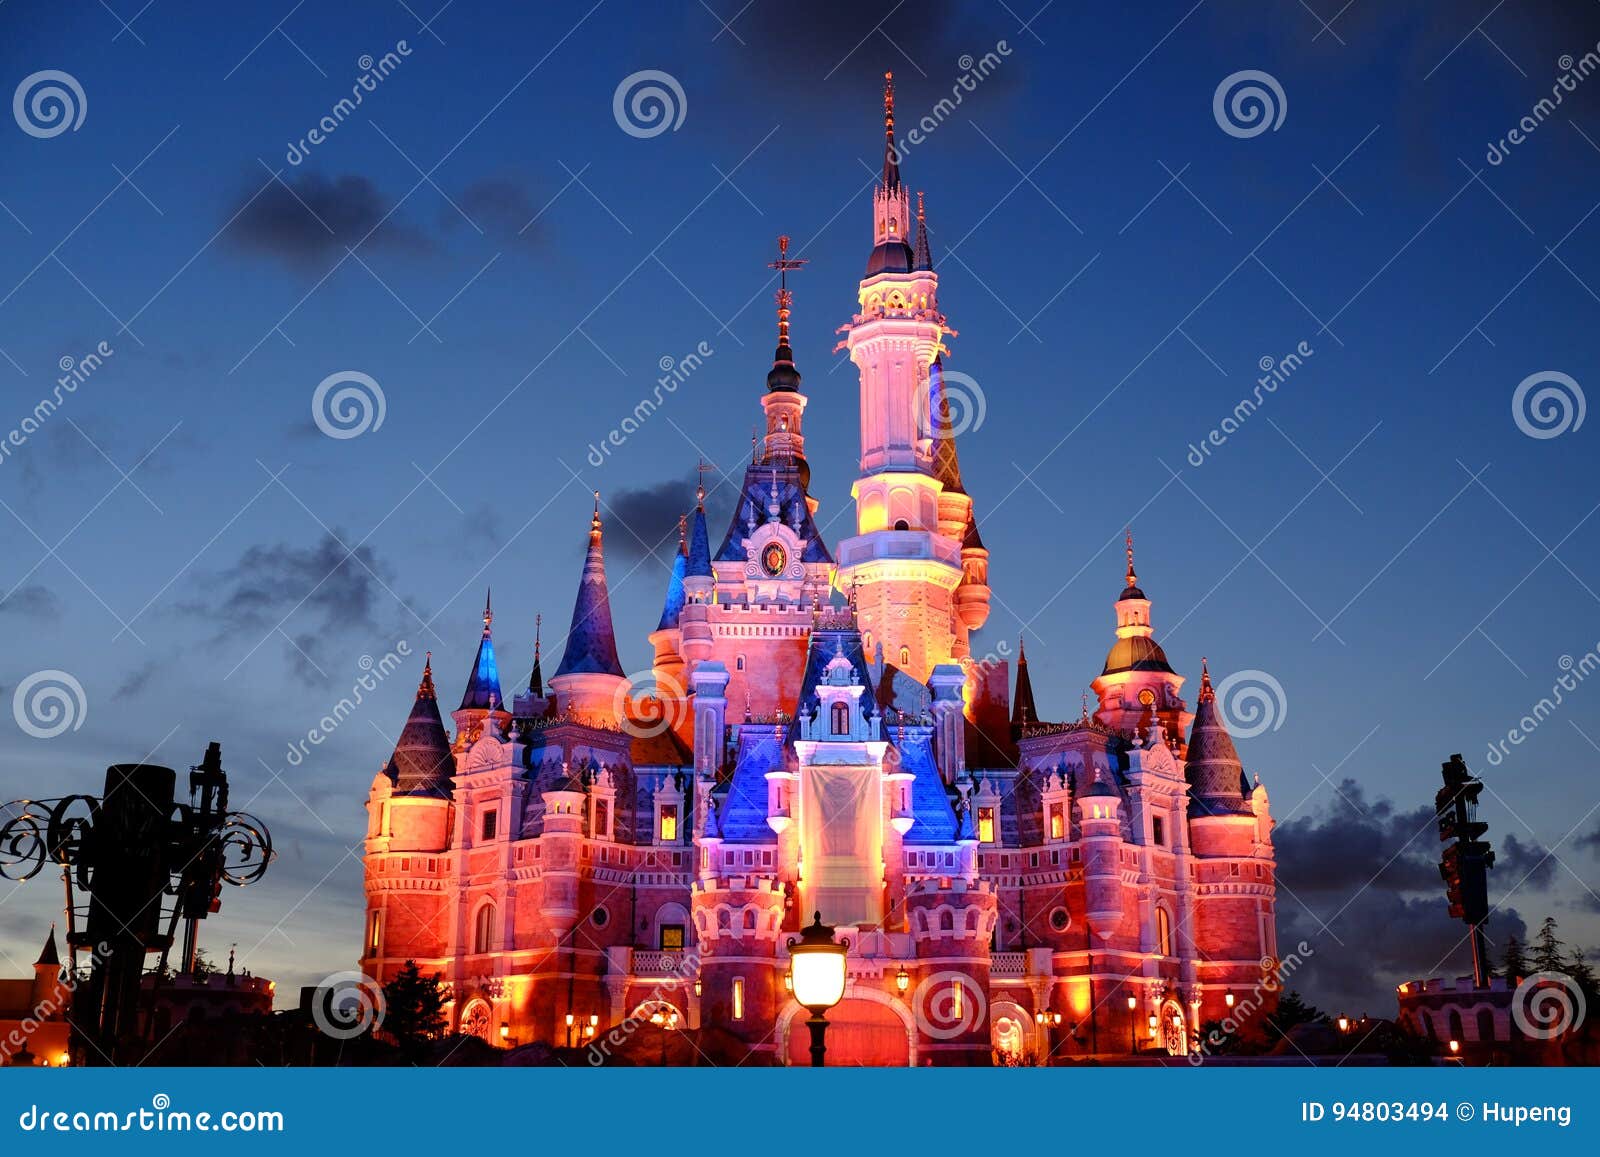 9,442 Disney Castle Stock Photos - Free & Royalty-Free Stock Photos from  Dreamstime